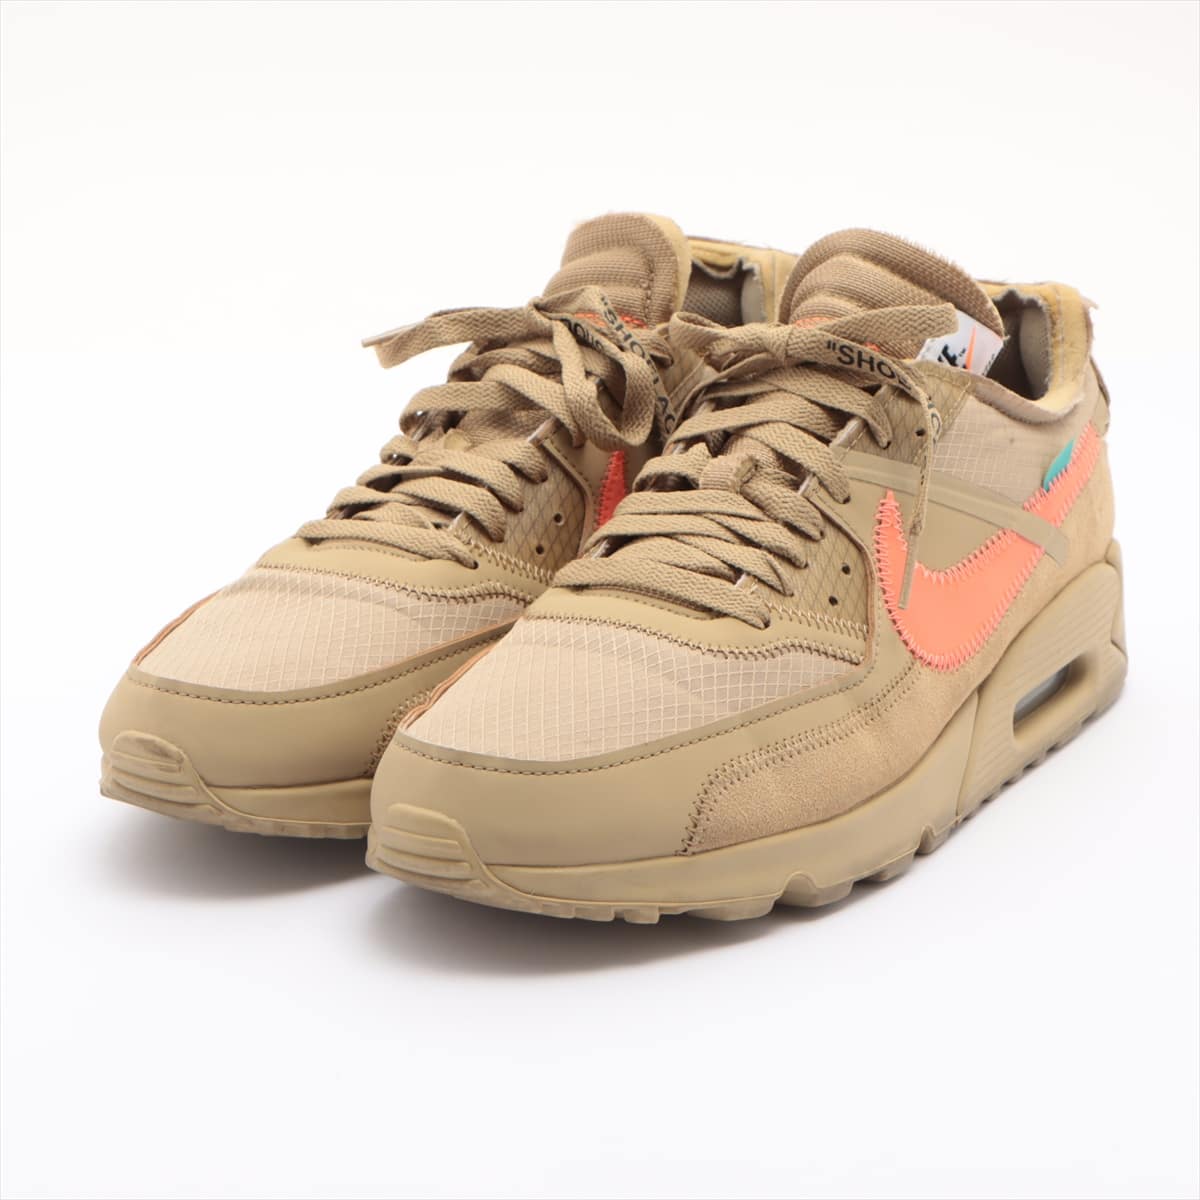 NIKE × OFF-WHITE Leather x fabric Sneakers 28.5cm Men's Beige THE 10:NIKE AIR MAX 90 AA7293-200